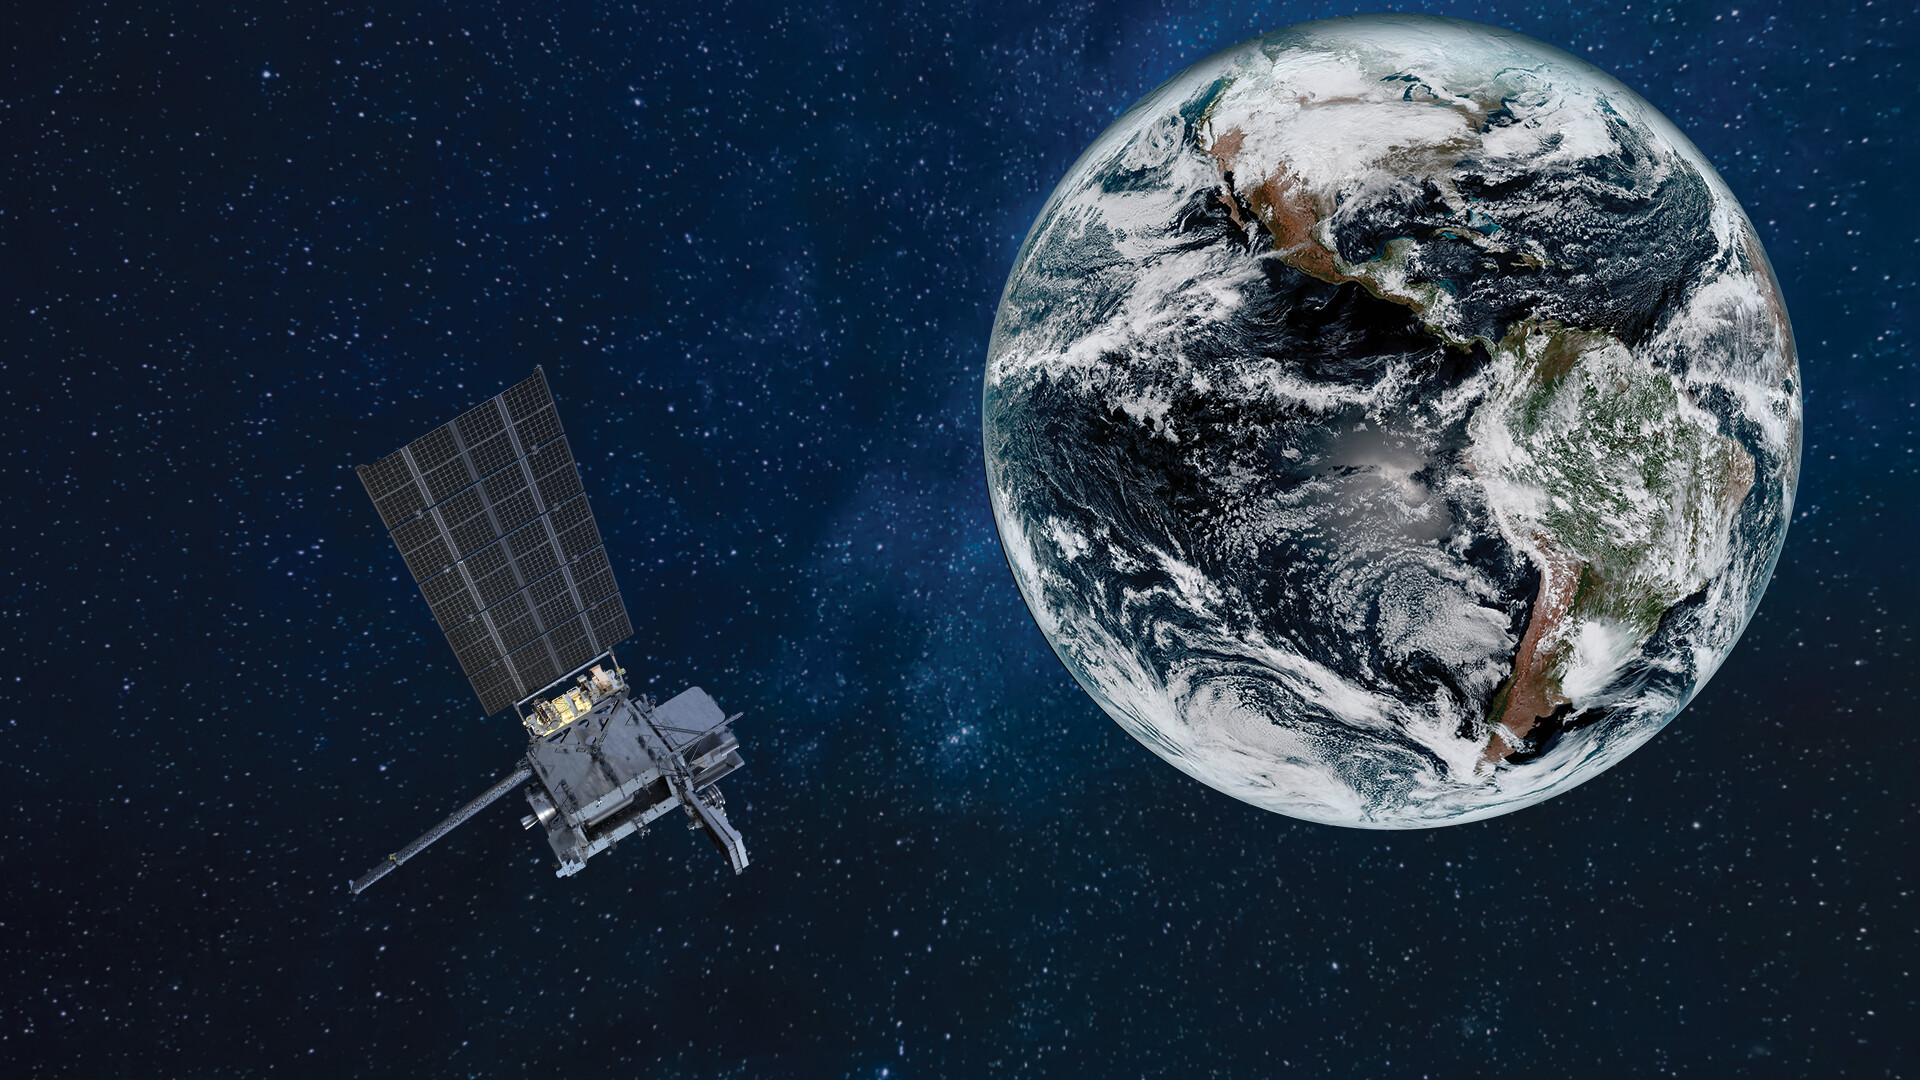 Artist concept of the GOES-U satellite in orbit around the earth